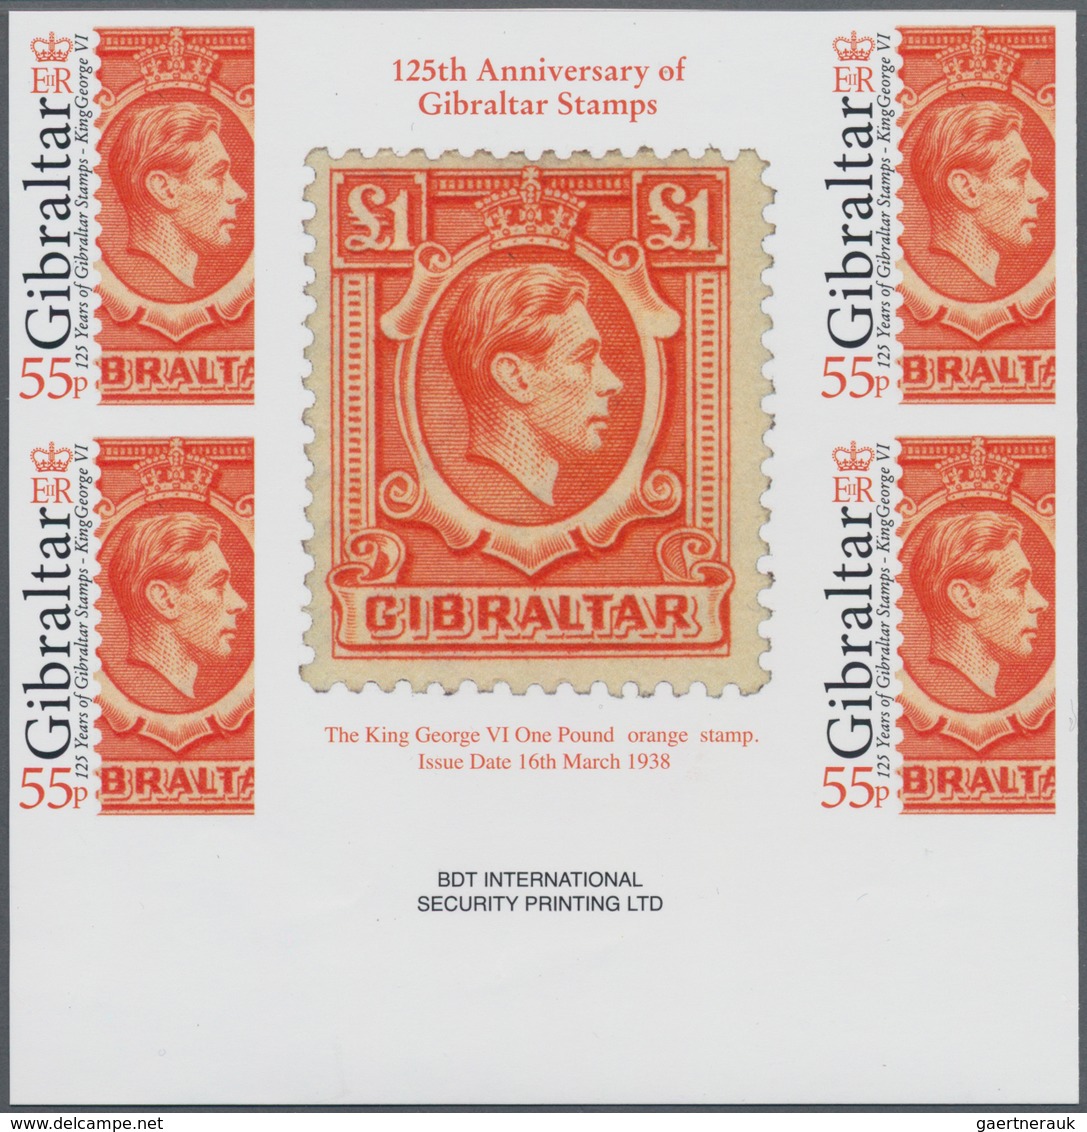 Gibraltar: 2011. Imperforate Block Of 2 Horizontal Gutter Pairs (4 Stamps) For The 55p Value Of The - Gibraltar